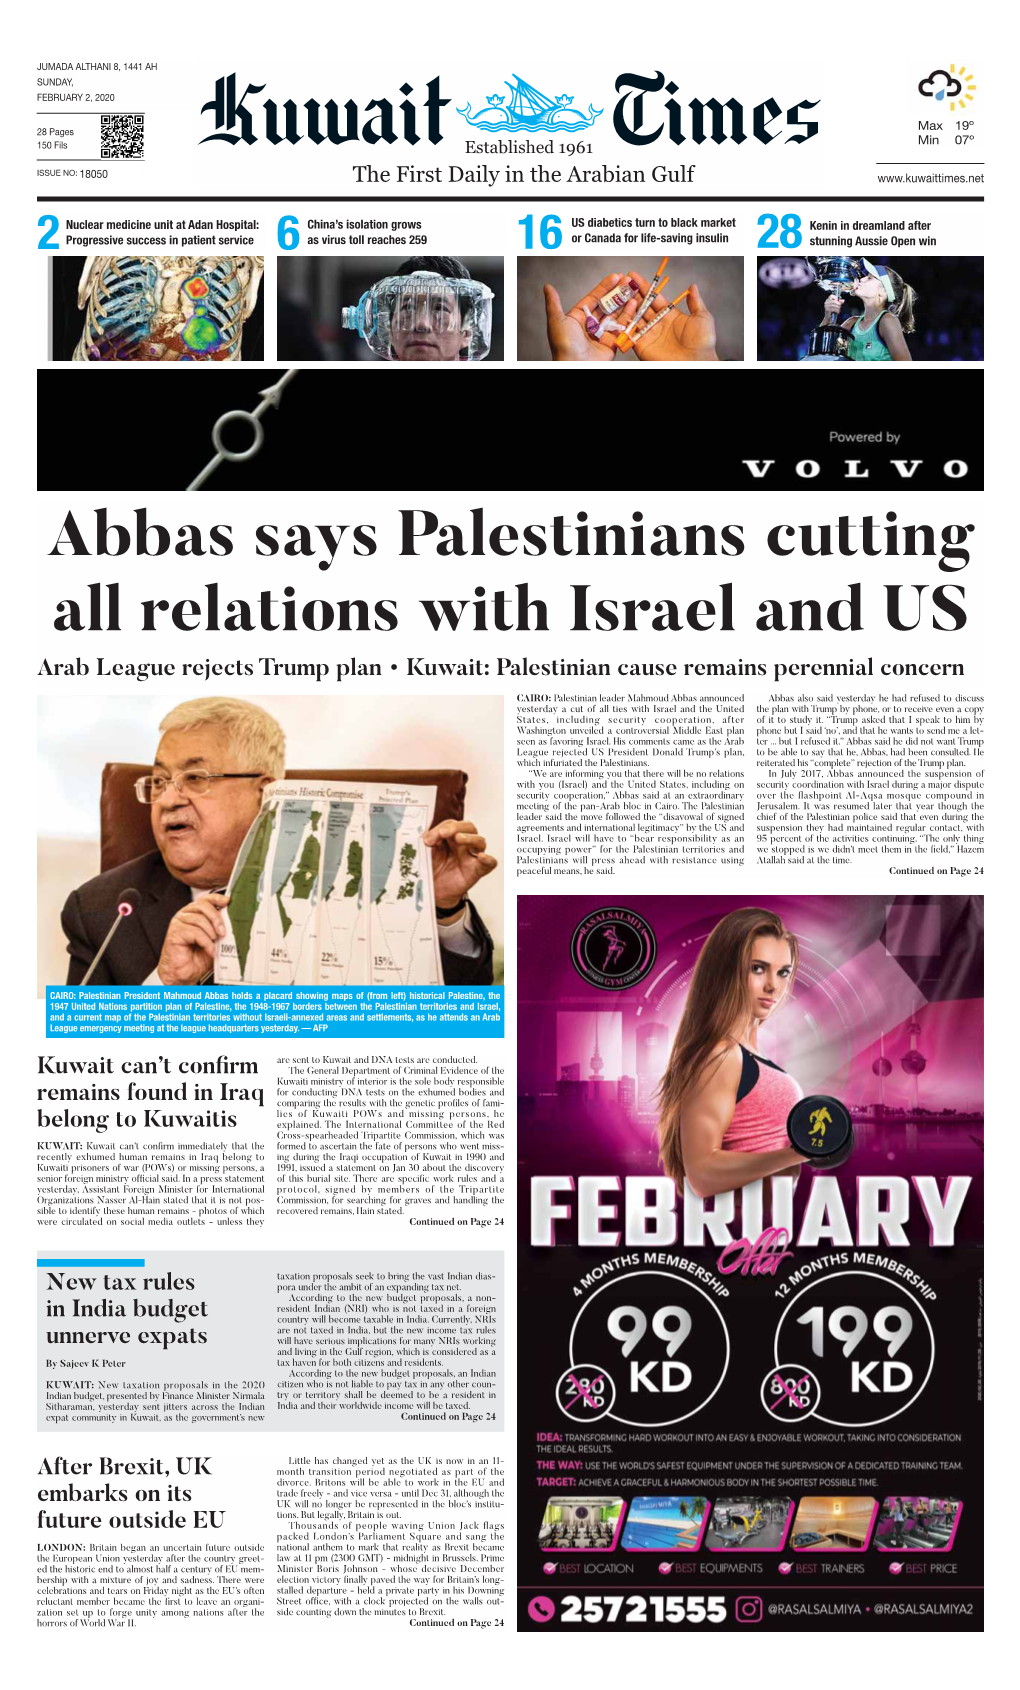 Abbas Says Palestinians Cutting All Relations with Israel and US Arab League Rejects Trump Plan • Kuwait: Palestinian Cause Remains Perennial Concern